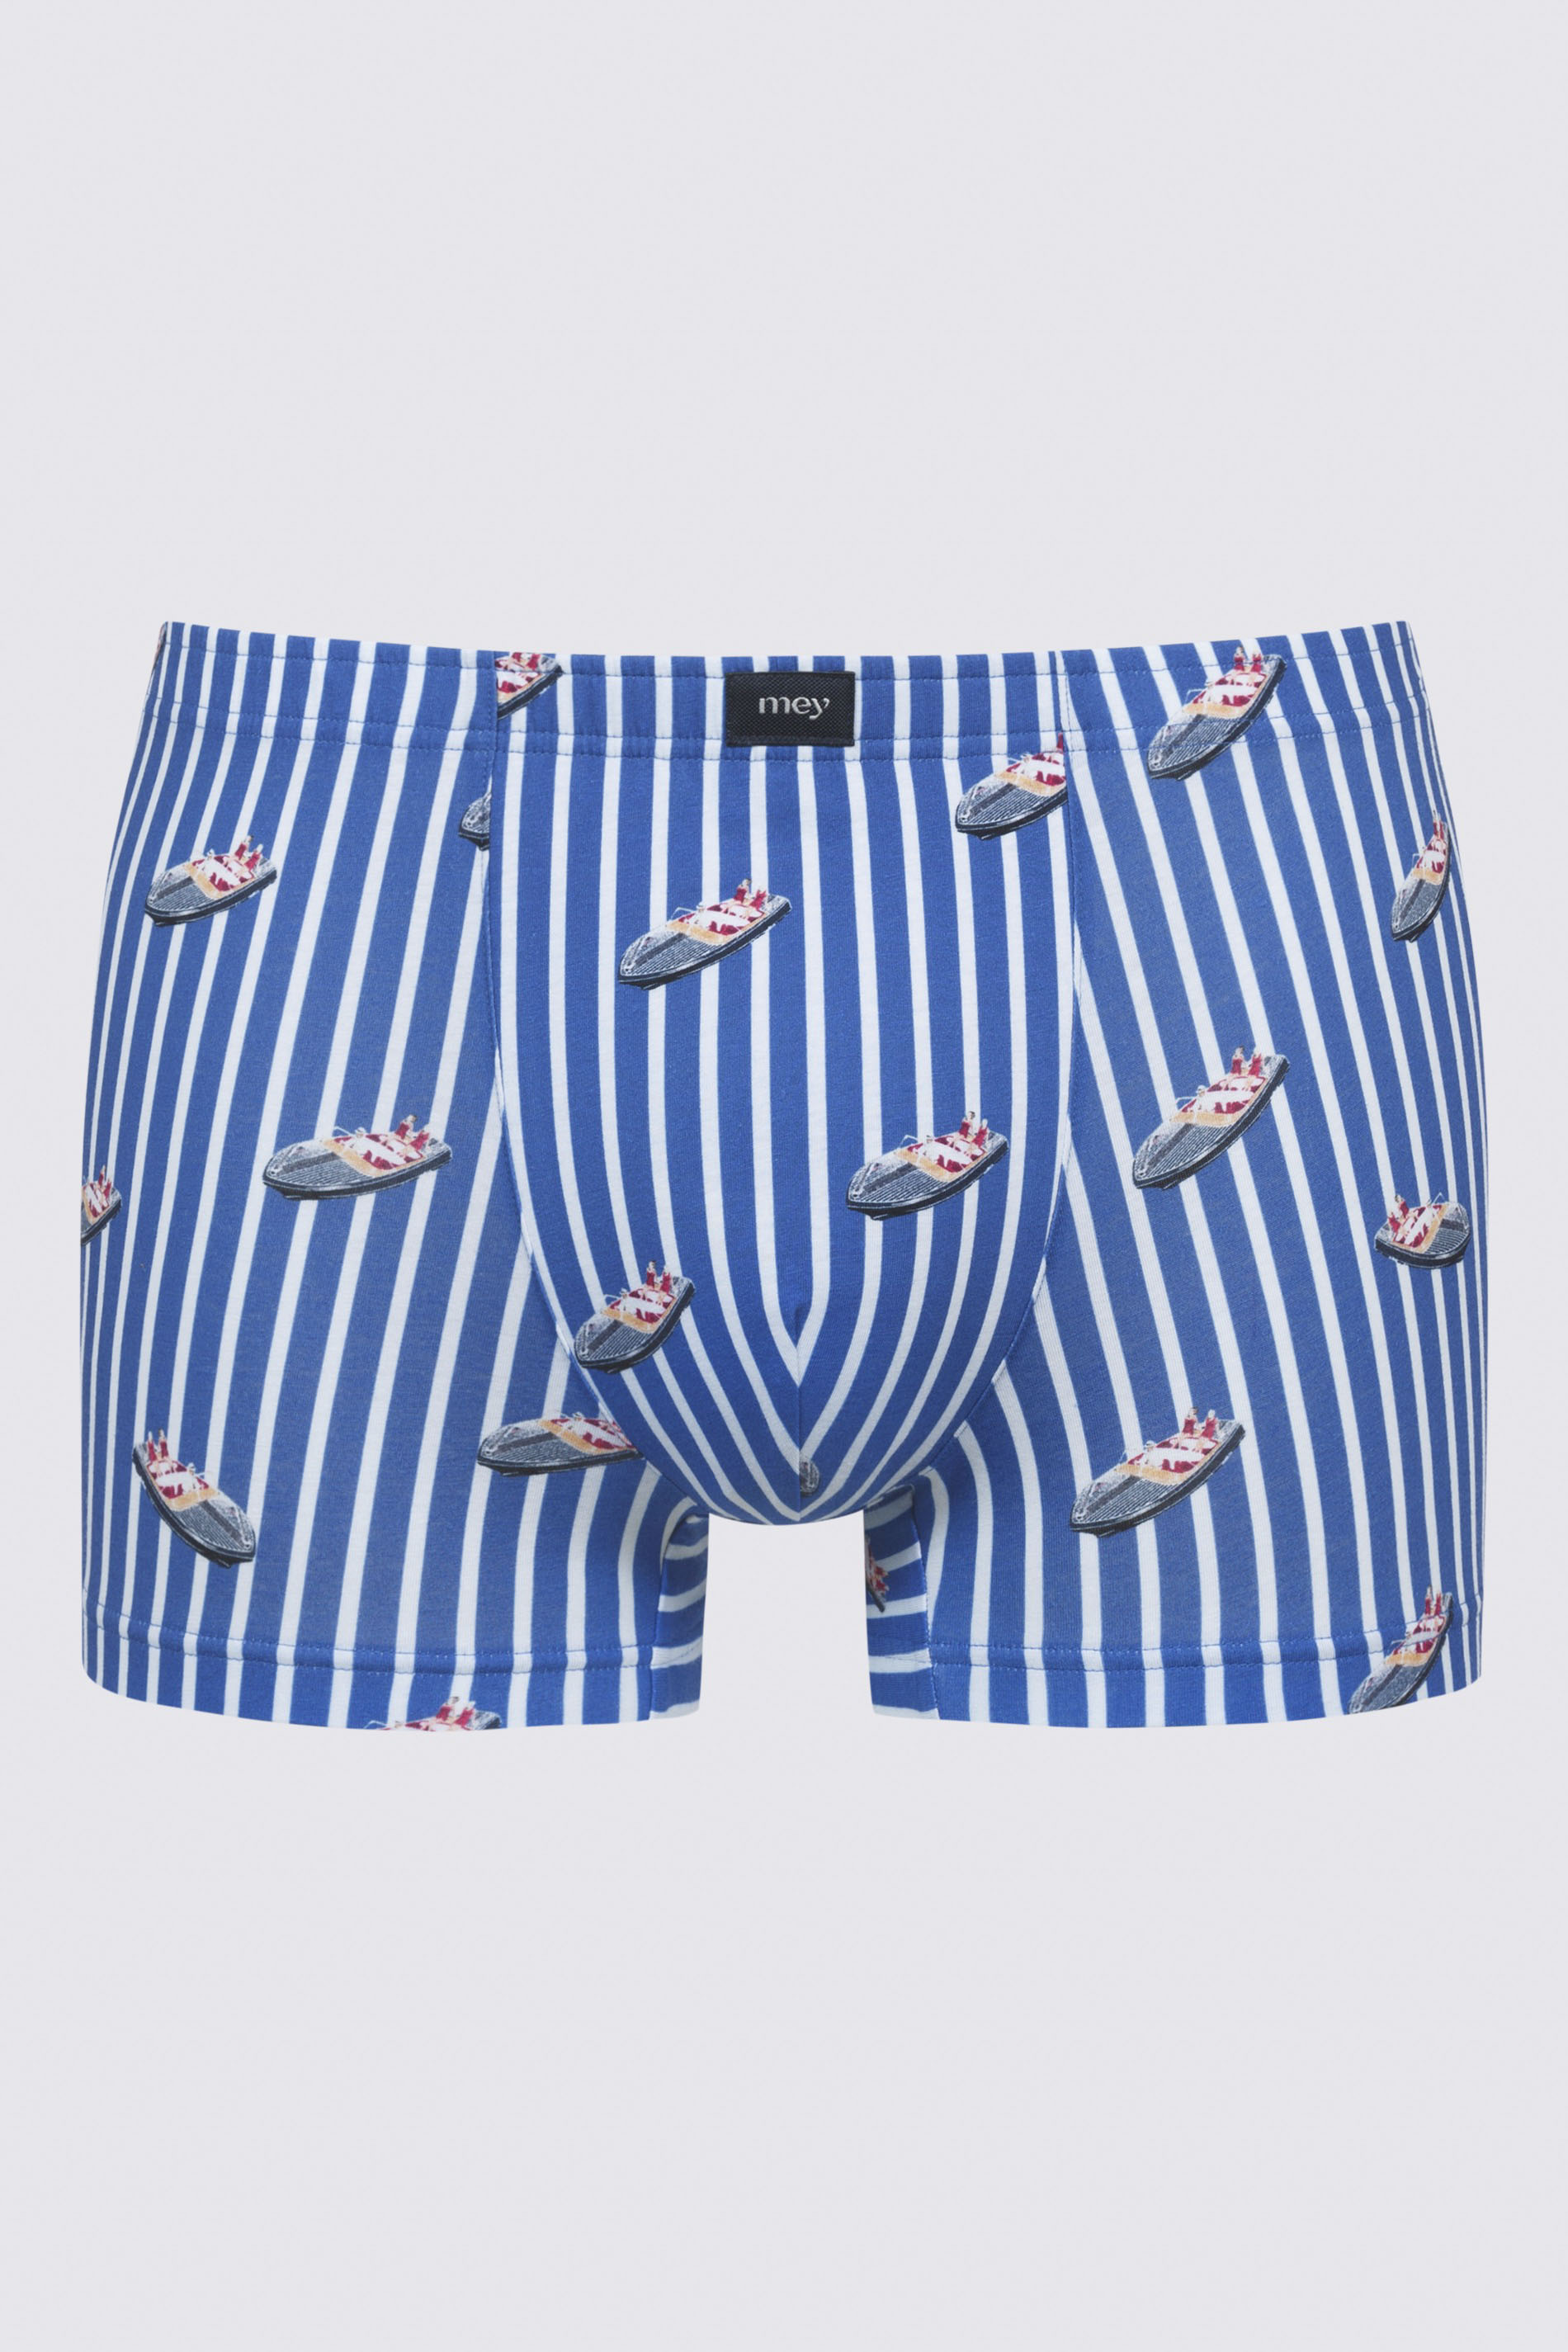 Shorty Serie Boats Cut Out | mey®